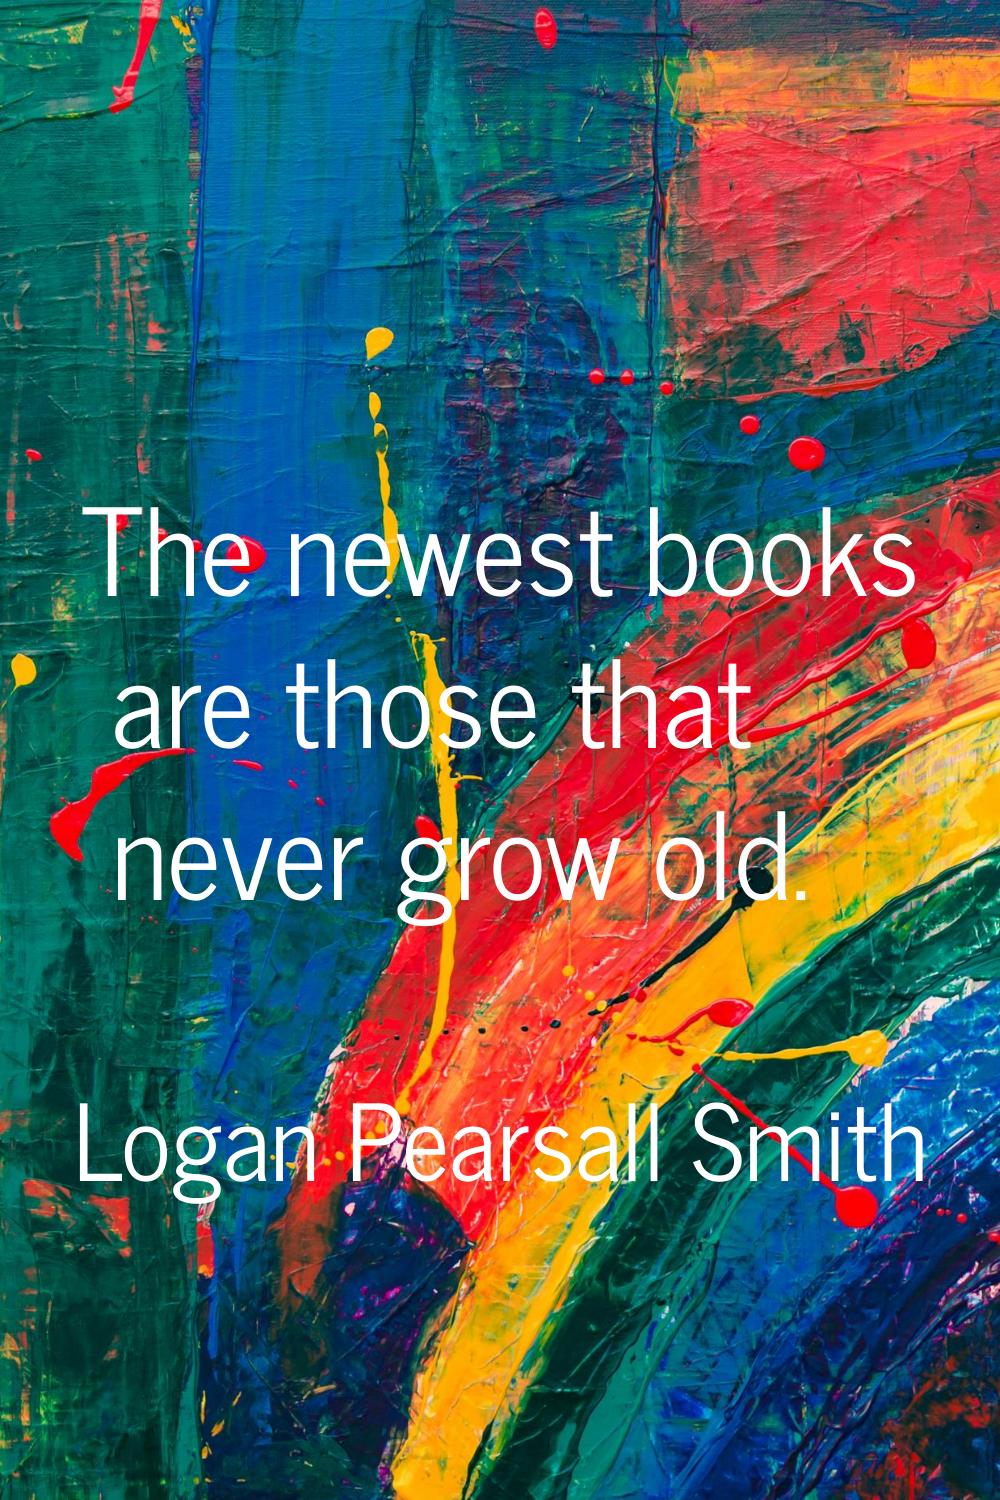 The newest books are those that never grow old.